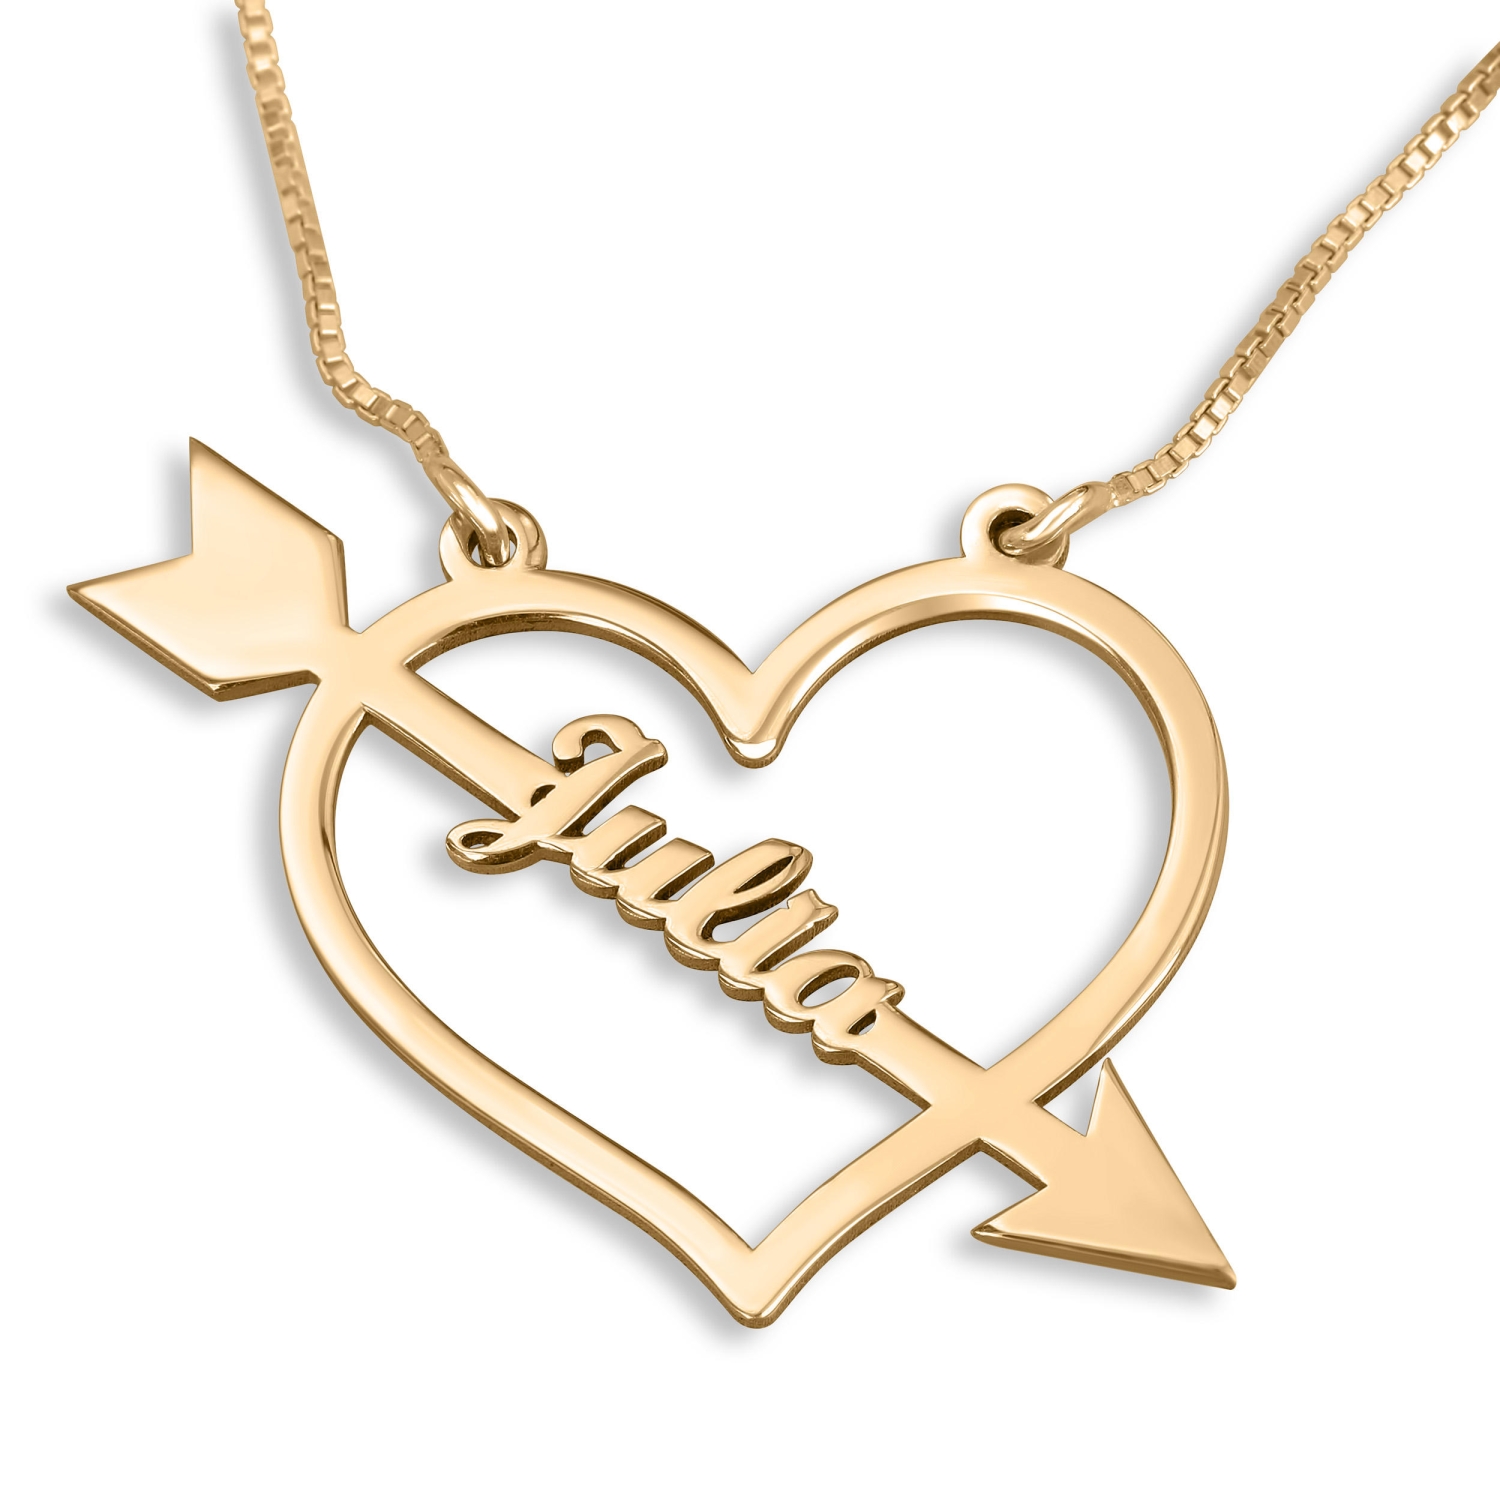 Gold Plated Heart and Arrow Personalized Name Necklace (Hebrew / English) - 1